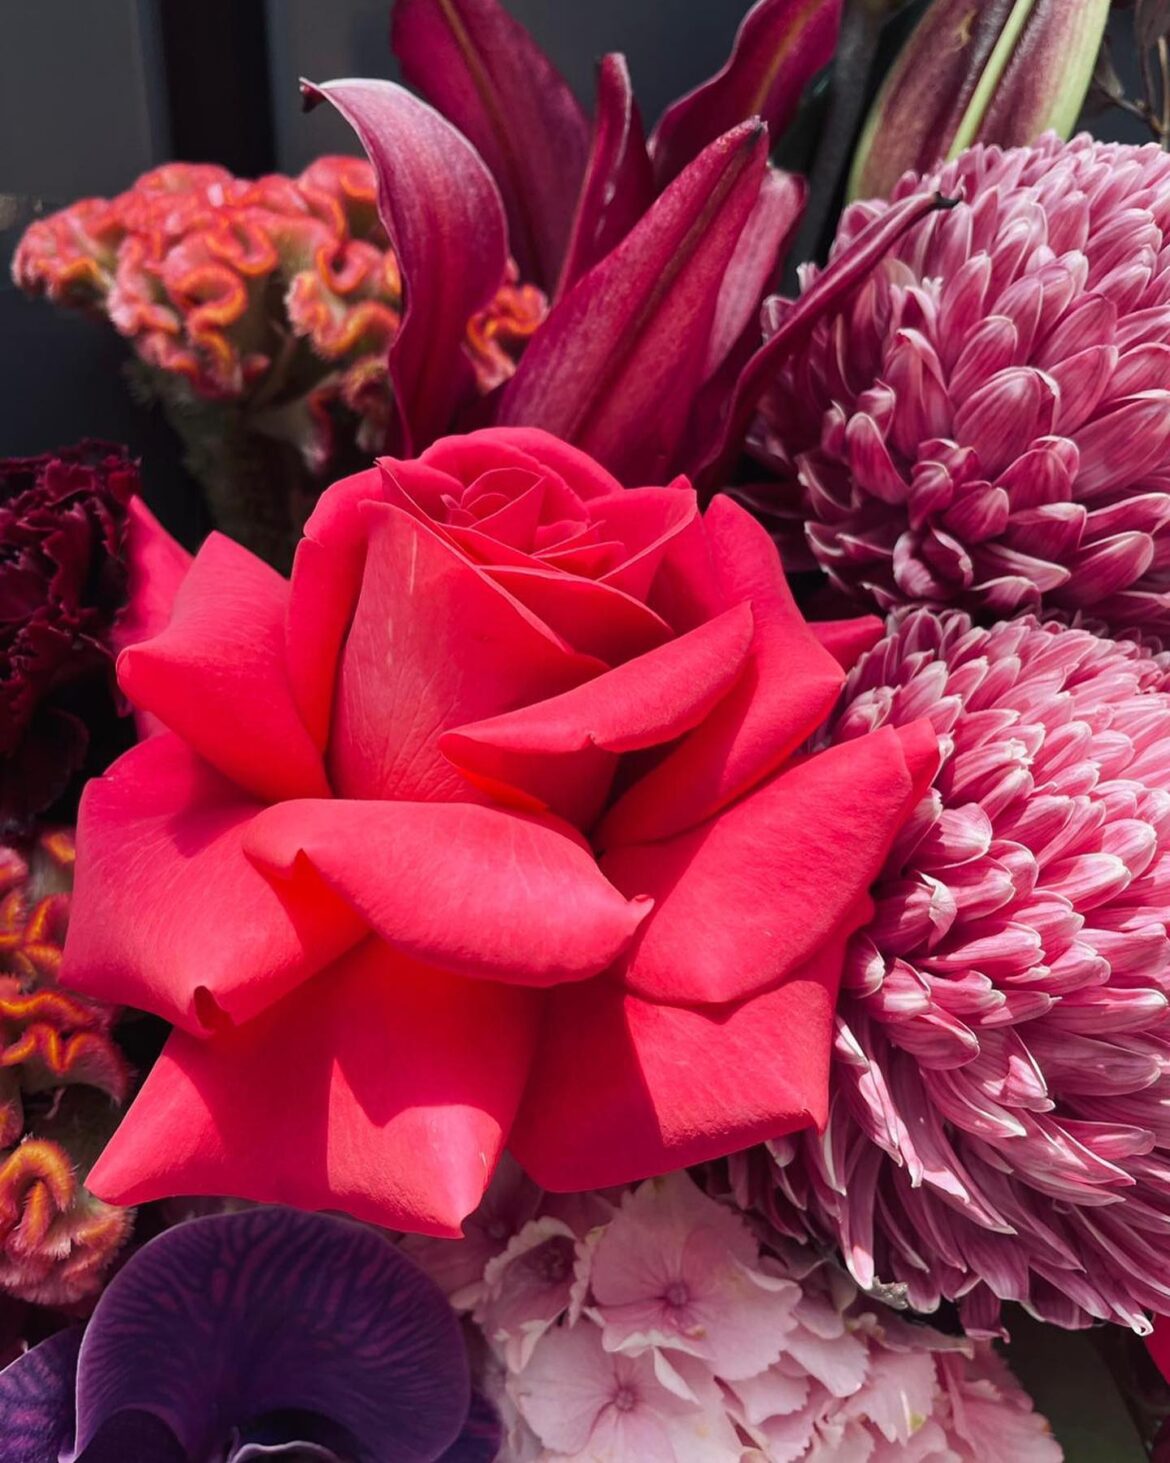 How Fresh Flowers Play a Major Role to Strengthen Your Relationship